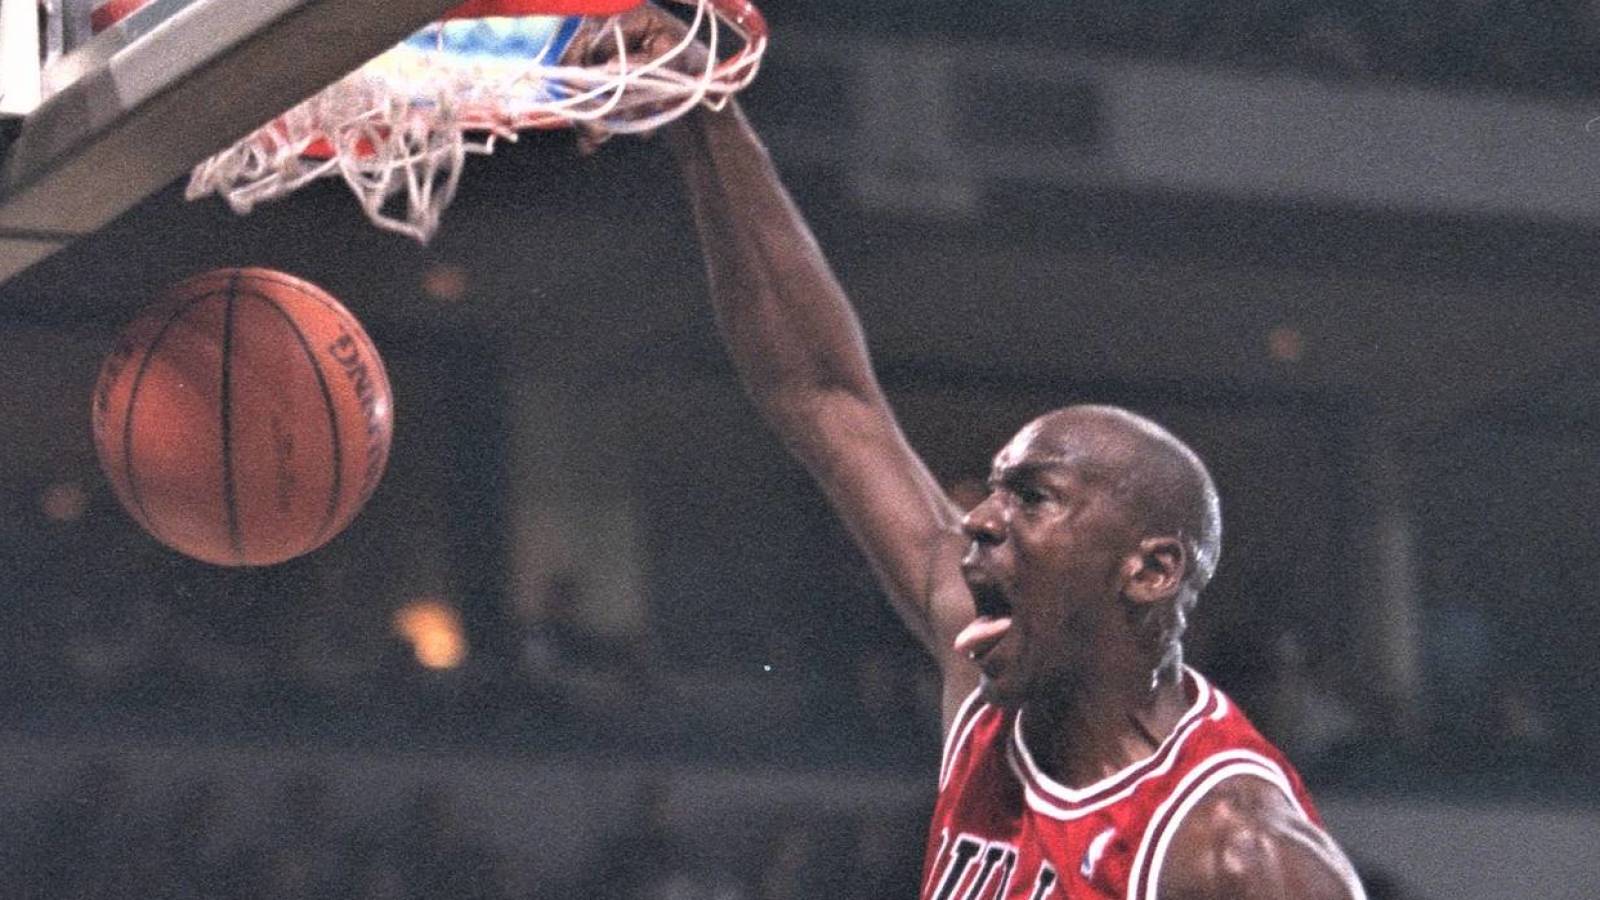 On This Day 32 Years Ago Michael Jordan did a Nasty Facial Dunk on Pat